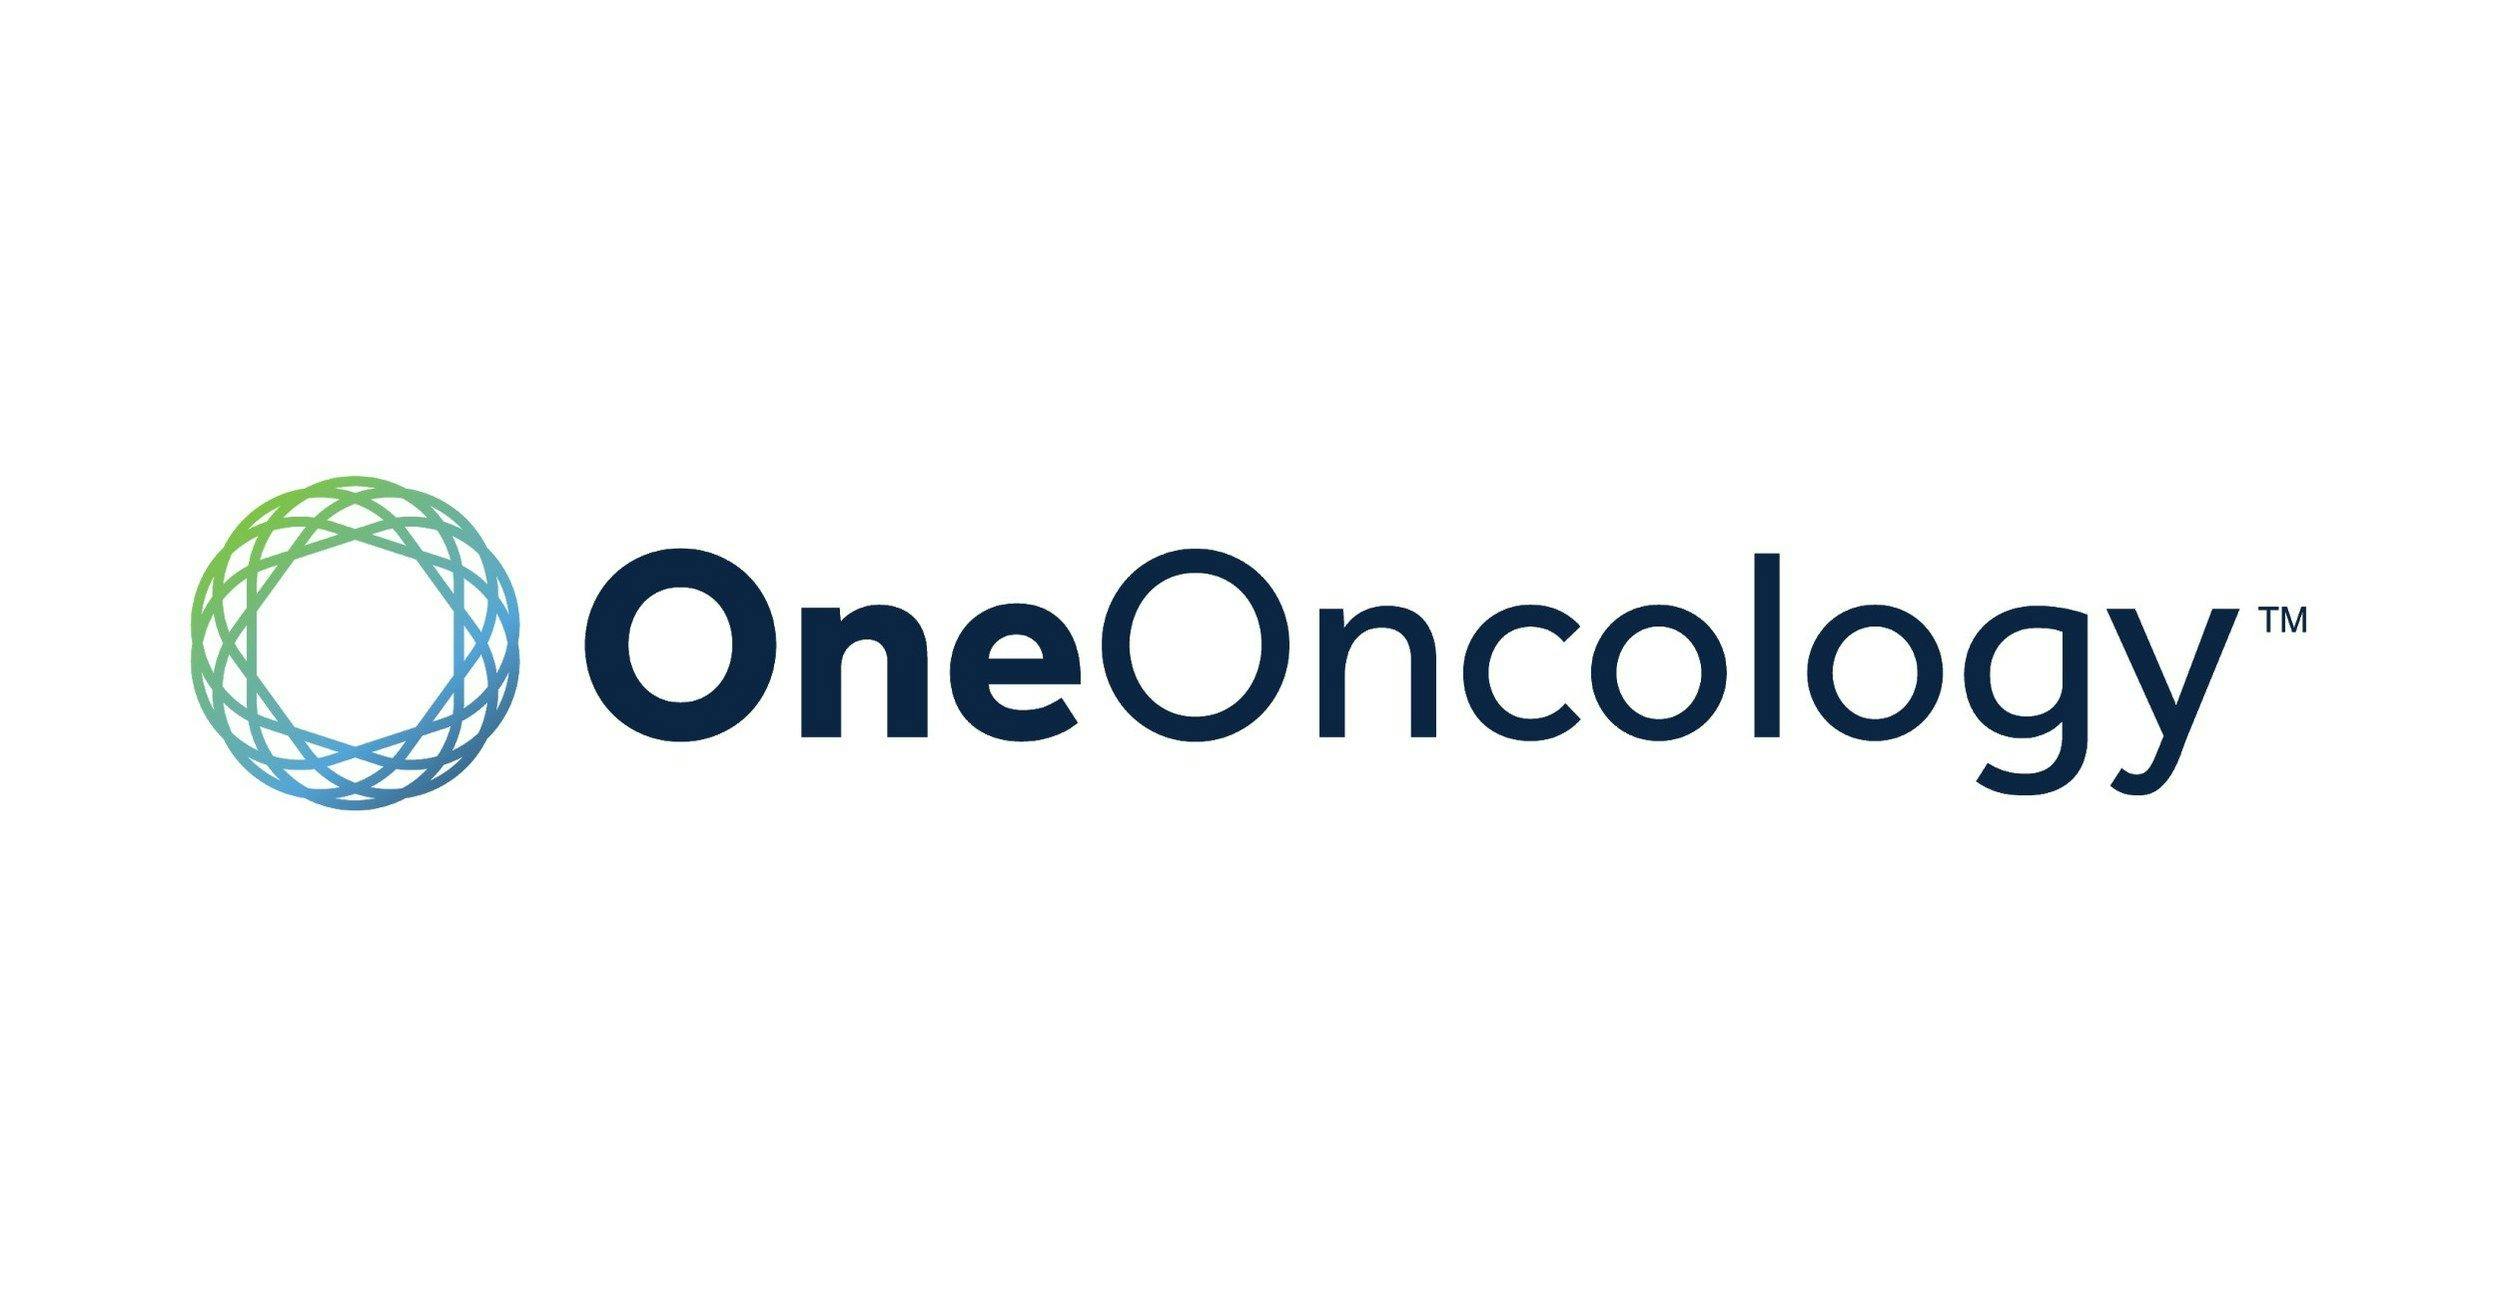 OneOncology and Its Practice Partners Celebrate 5 Years of Cancer Care Excellence